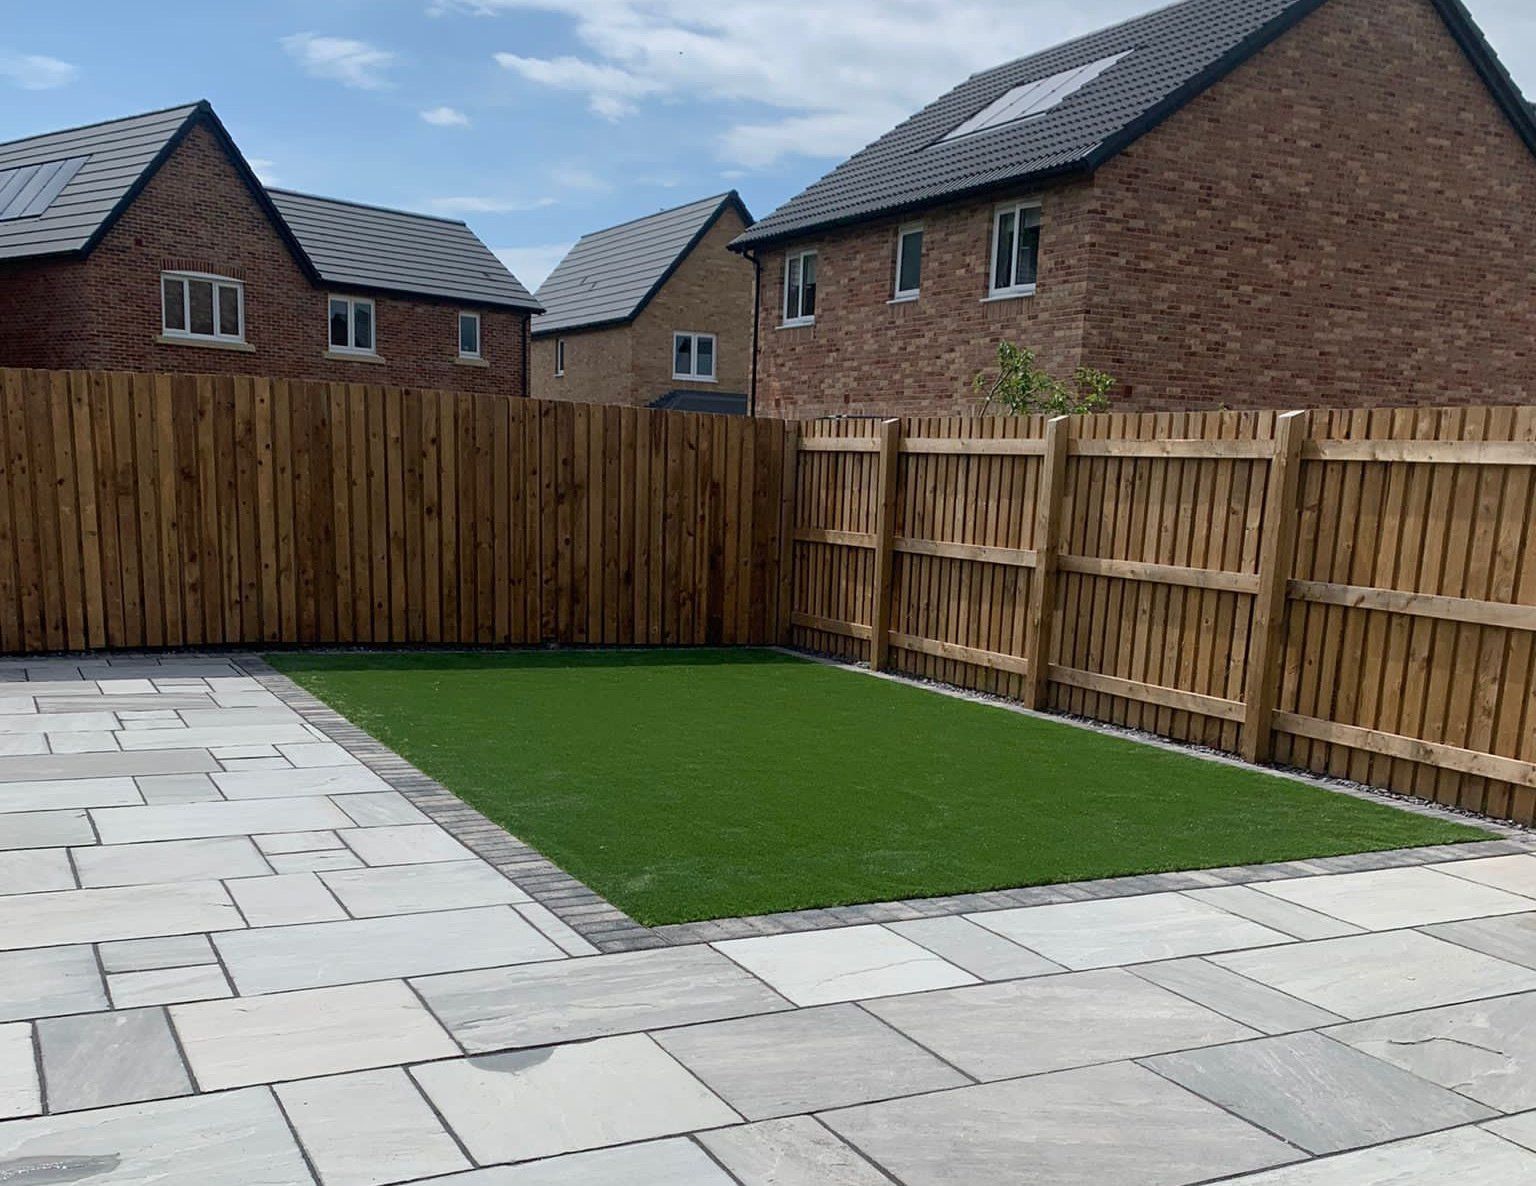 Landscaping and Artificial Lawns Lytham St Annes by Local Driveay Company